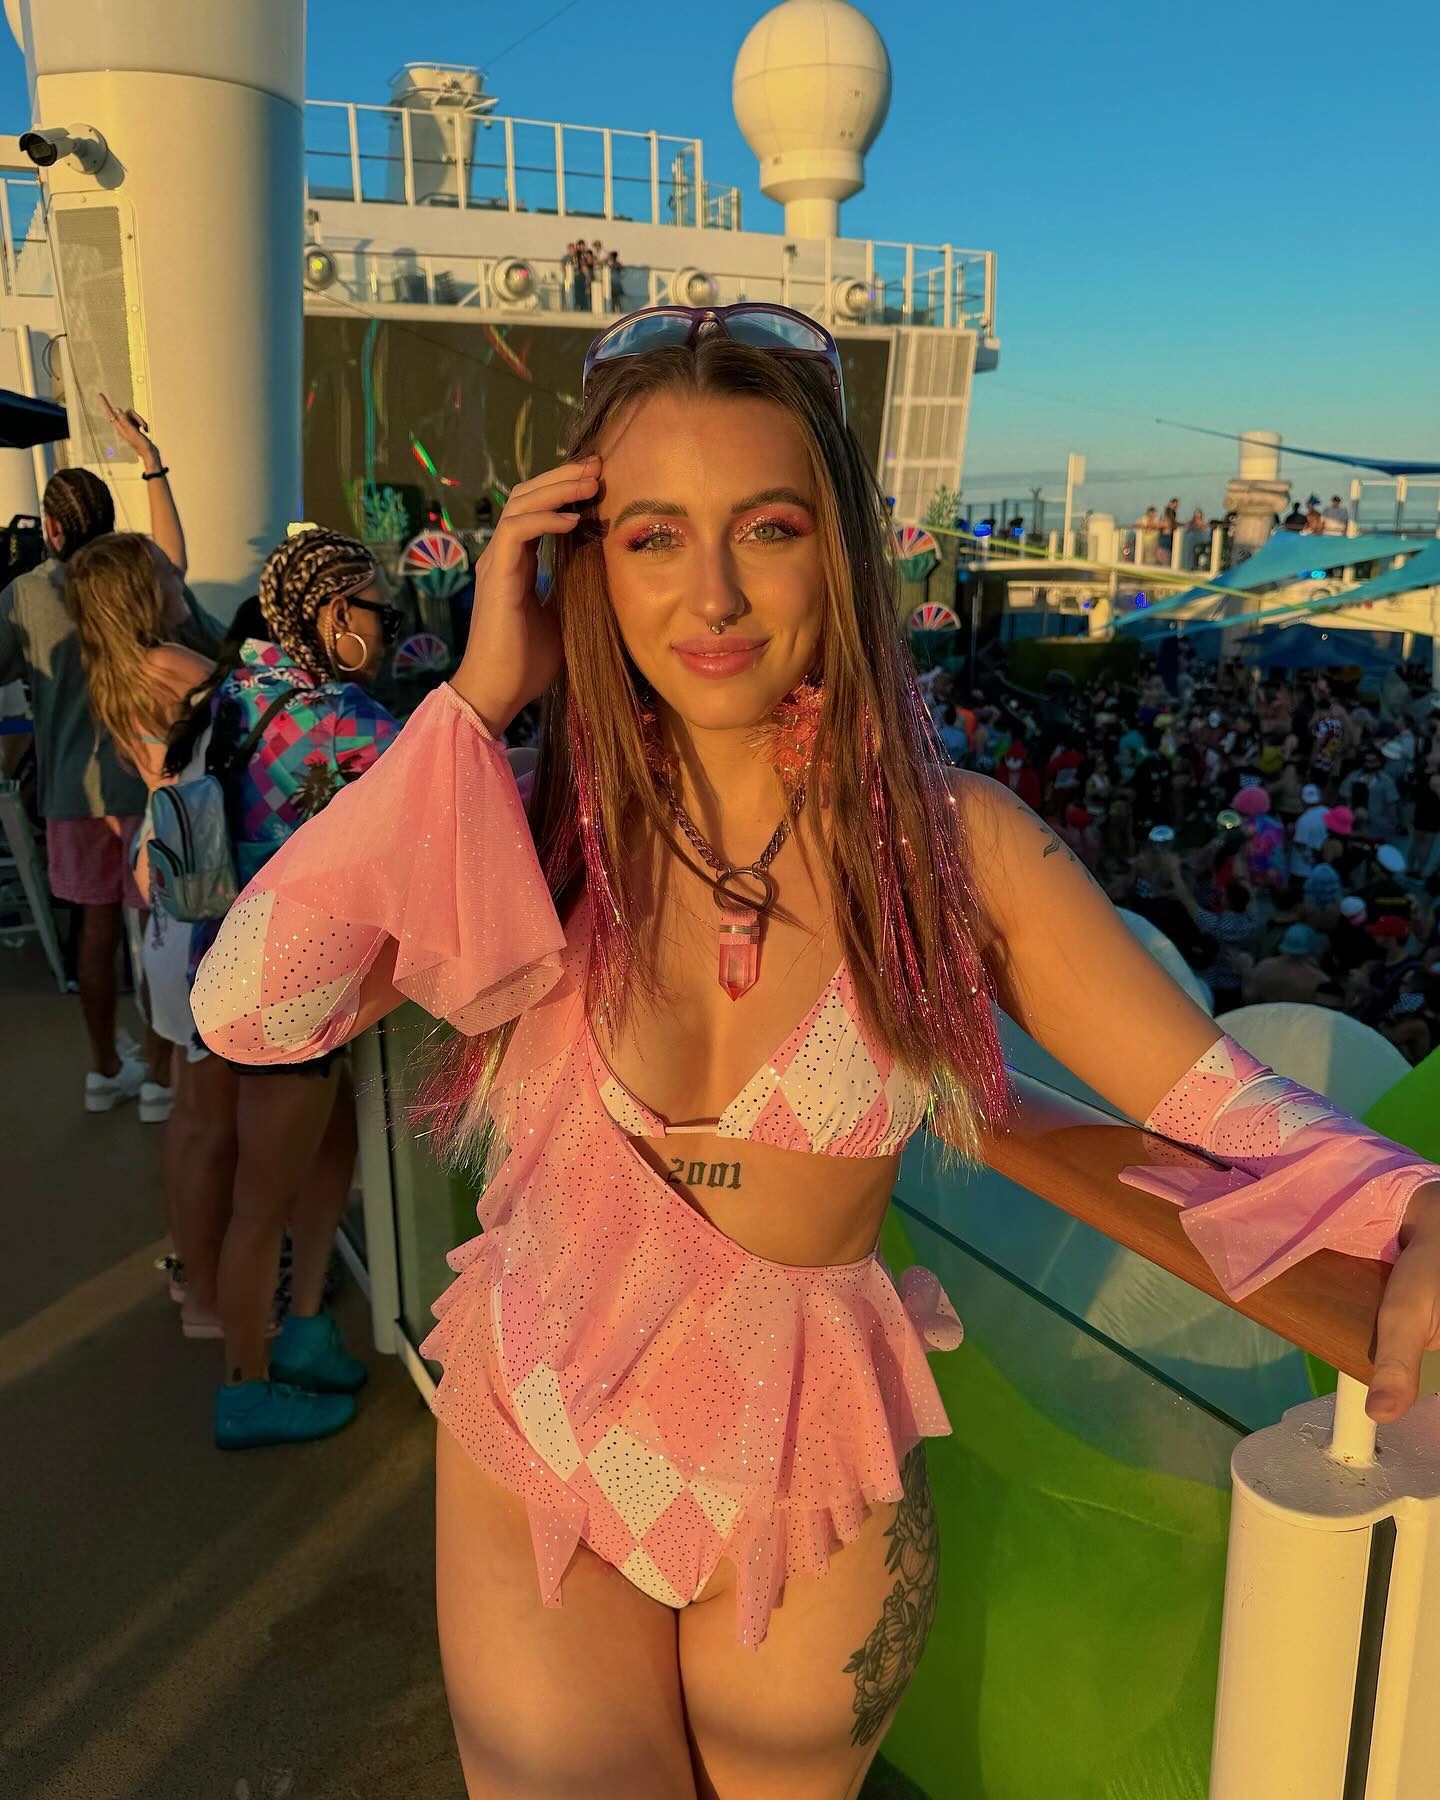 @groovecruise day ???? I’ve lost count at this point LOL

The theme for this day was Groove Racers 🏎️🏁🌸 so u know I had to be a pink one heheheheh 🥰 I have 2 more looks from gc to show yall and im v excited! 

Something about being on a boat in the middle of no where is just so much fun. Ill be on another boat (for funsies) in March with the fam bam and im honestly so pumped for that… 

Outfit Deetz ☆⋆｡𖦹°‧★
Set: @luanathelabel 
Necklace: @shestherainbow 
Earrings: @brittsblossoms
Eye Makeup: @lunautics (hair tinsel too) & @colourpopcosmetics

Me patiently waiting for the Al g0 to love me again 🧍🏼‍♀️

Anyways yall I hope February and 2024 in general is treating you right! And I hope u all have an amazing v day <3 

#raveoutfit #ravefashion #ravewear #festivalfashion #festivaloutfit #festivalstyle #groovecruise #GCFAM #GCMIA24